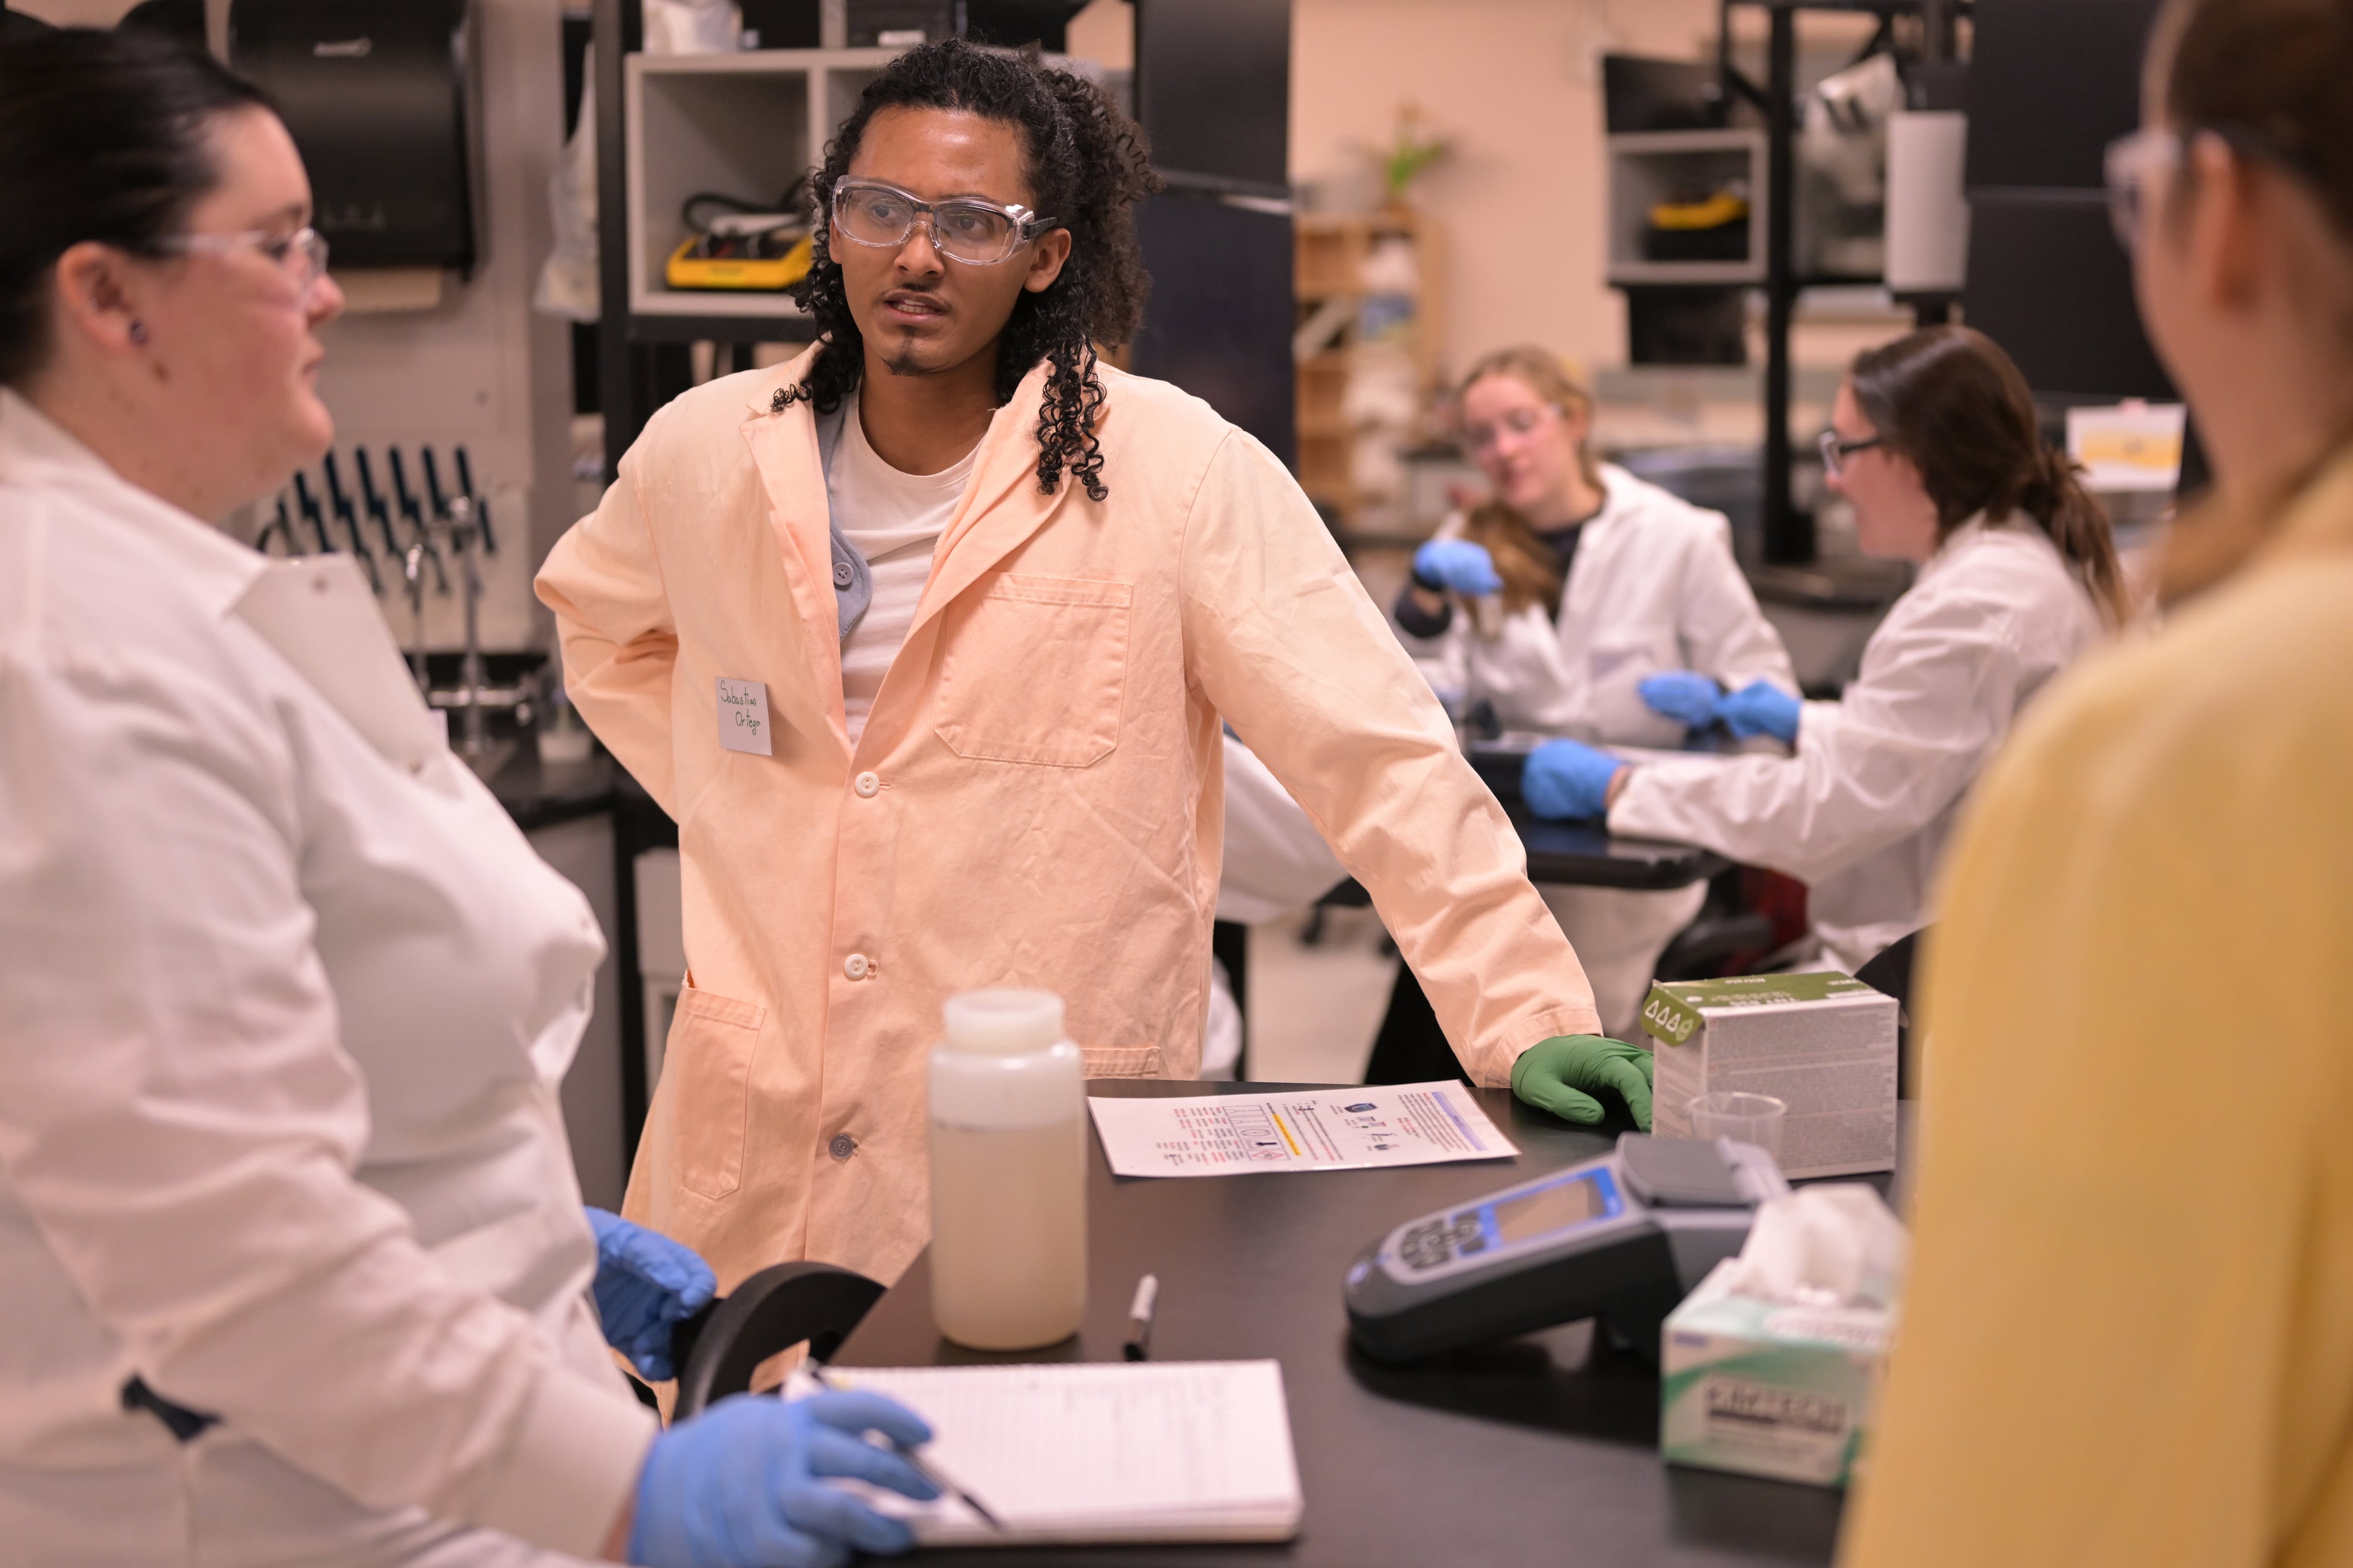 Students wearing lab coats and safety equipment work in a college laboratory.